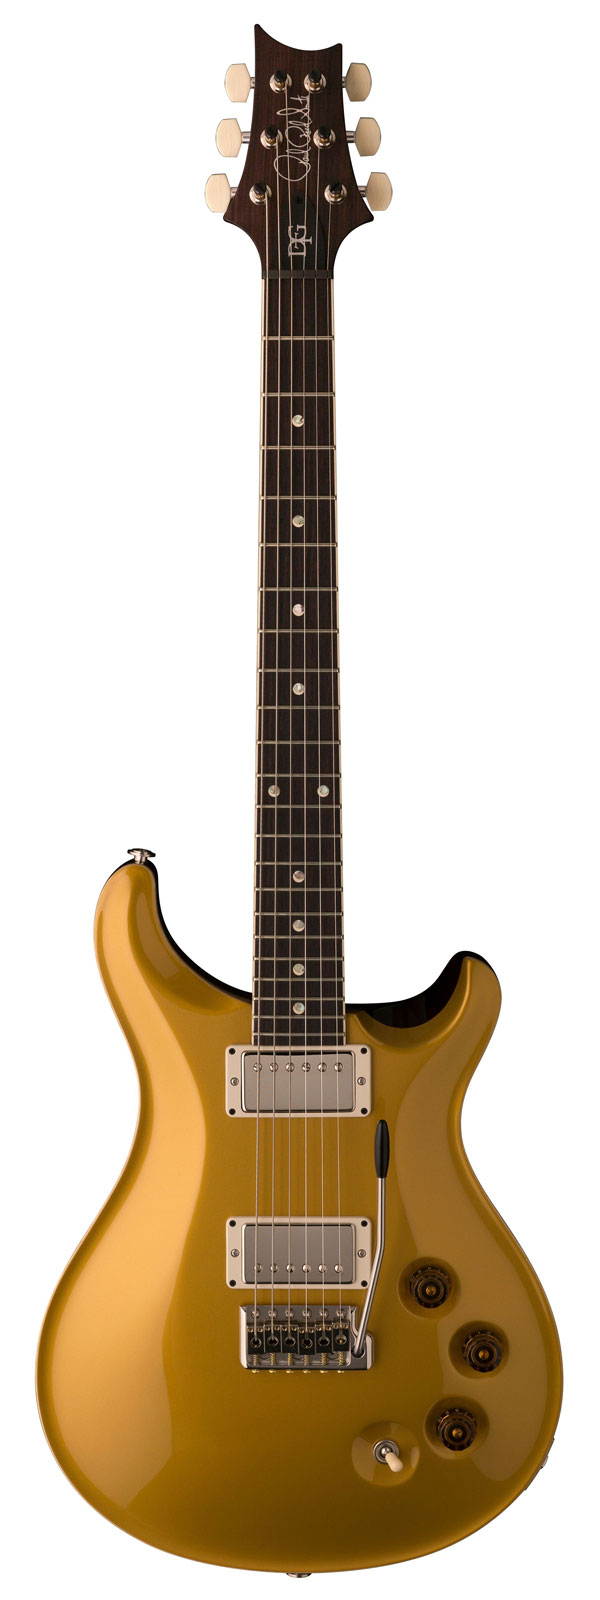 PRS - PAUL REED SMITH DGT GOLD TOP MOONS